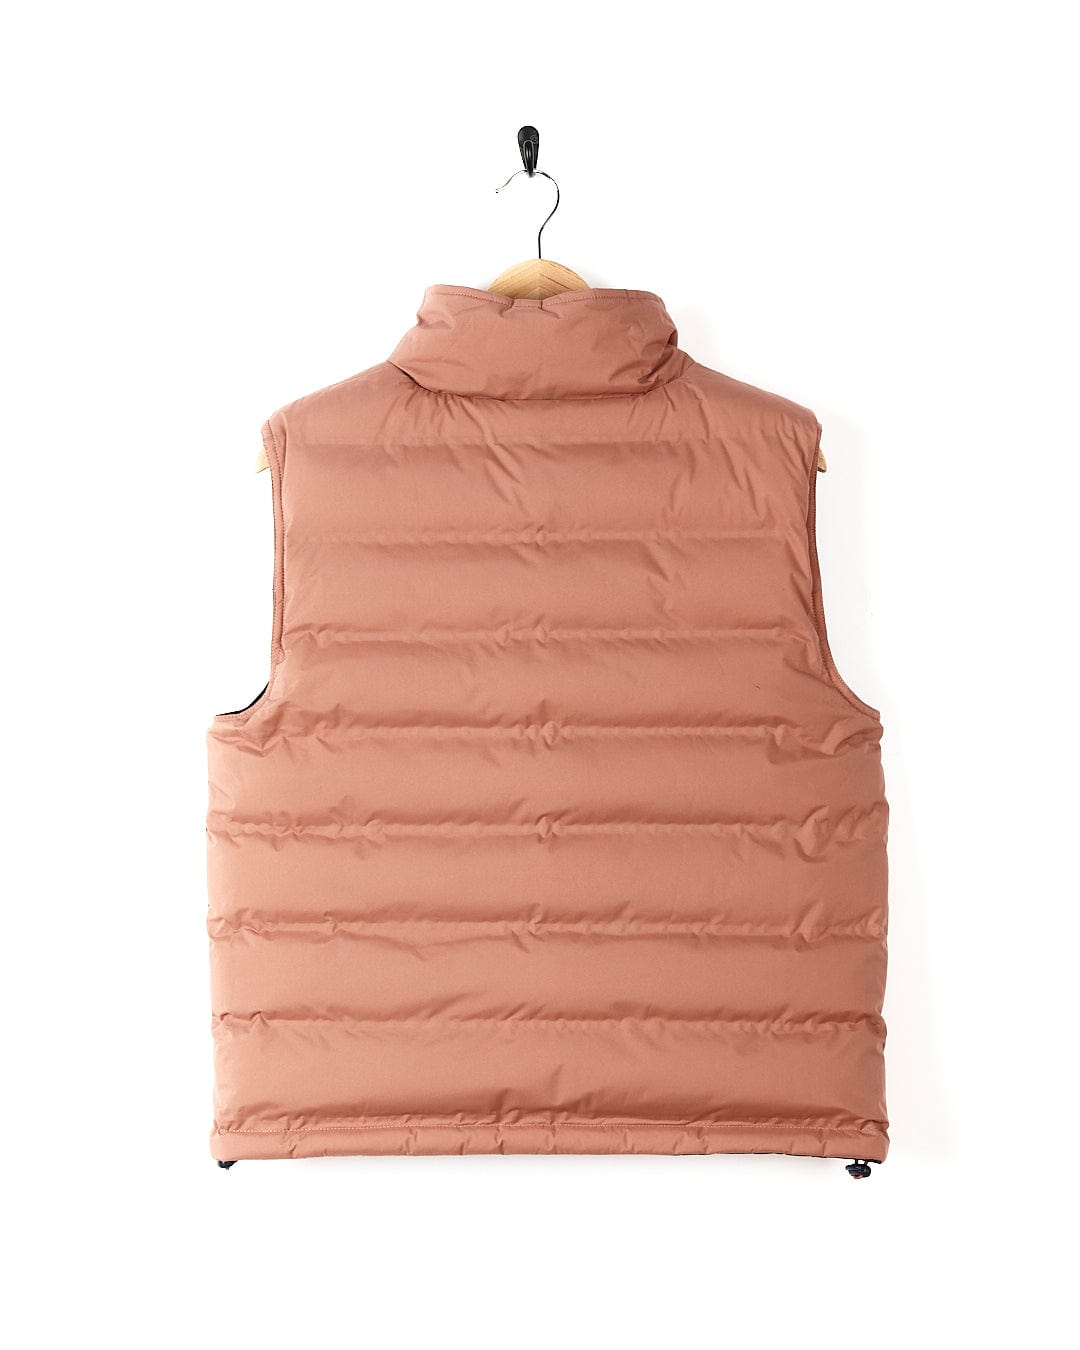 A blue/pink Saltrock Astra - Womens Reversible Padded Gilet with a detachable hood, hanging on a hanger.